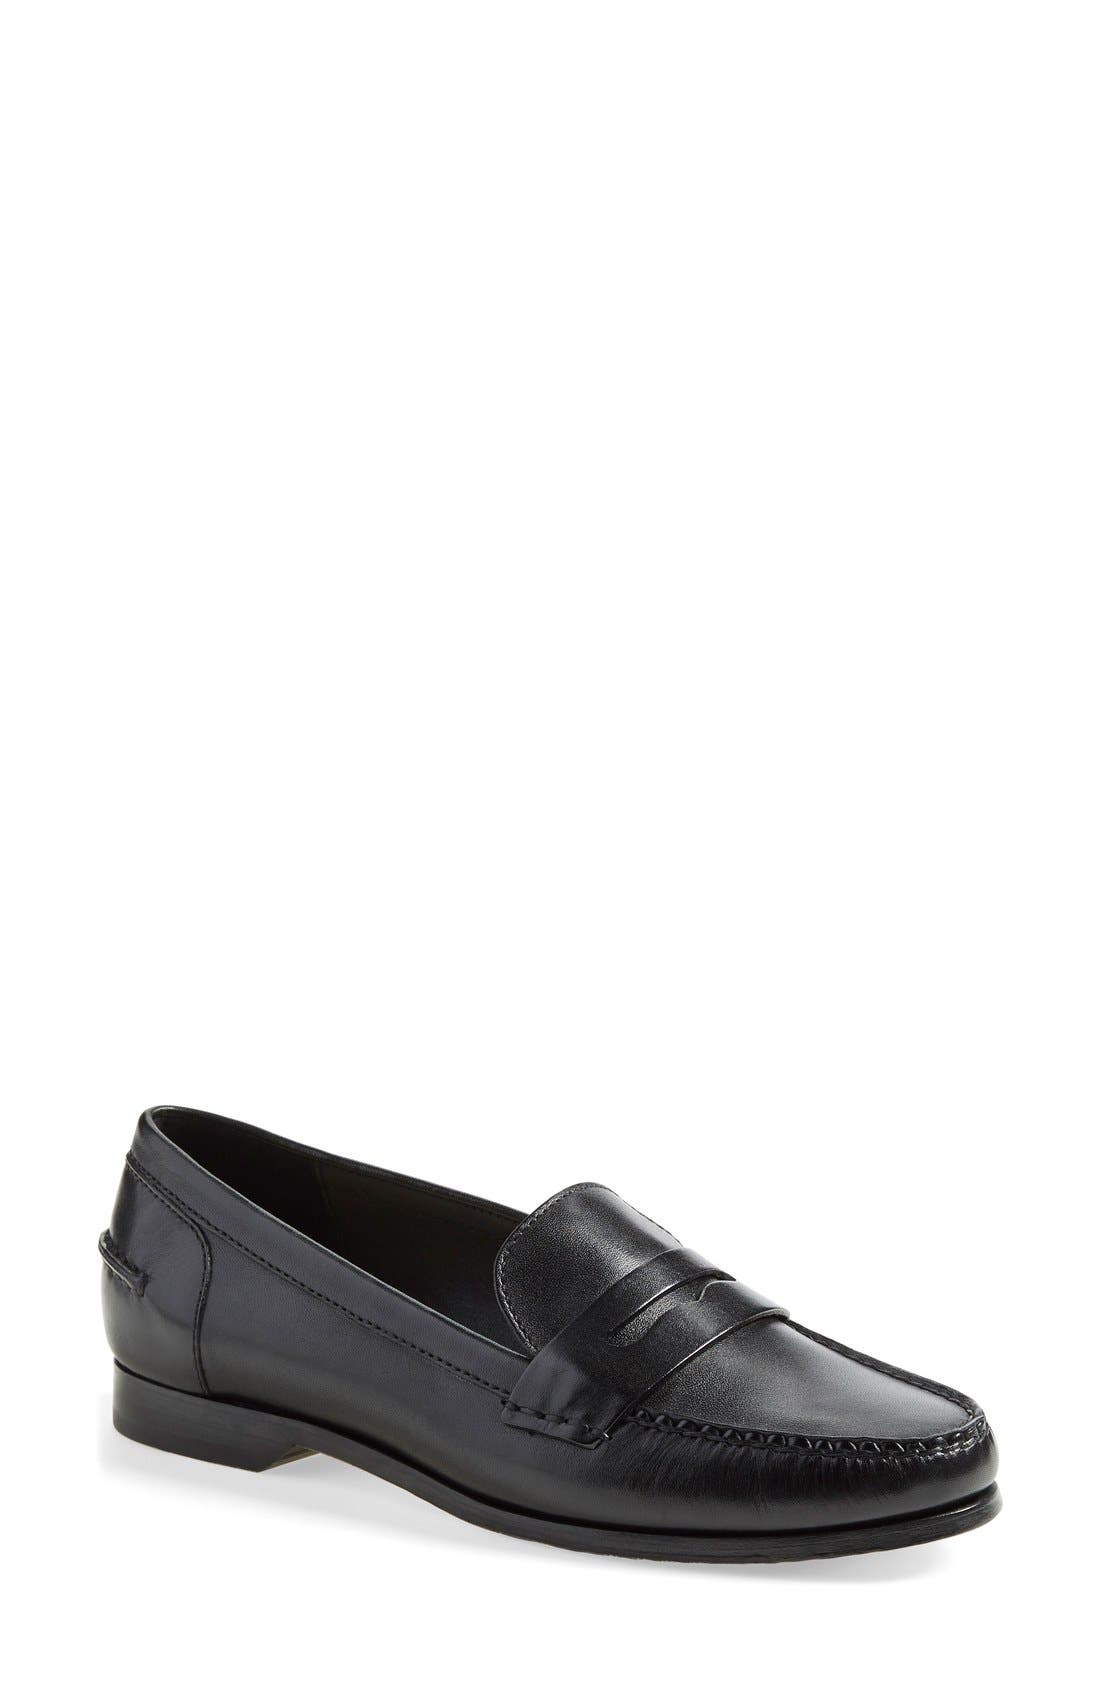 cole haan penny loafers womens